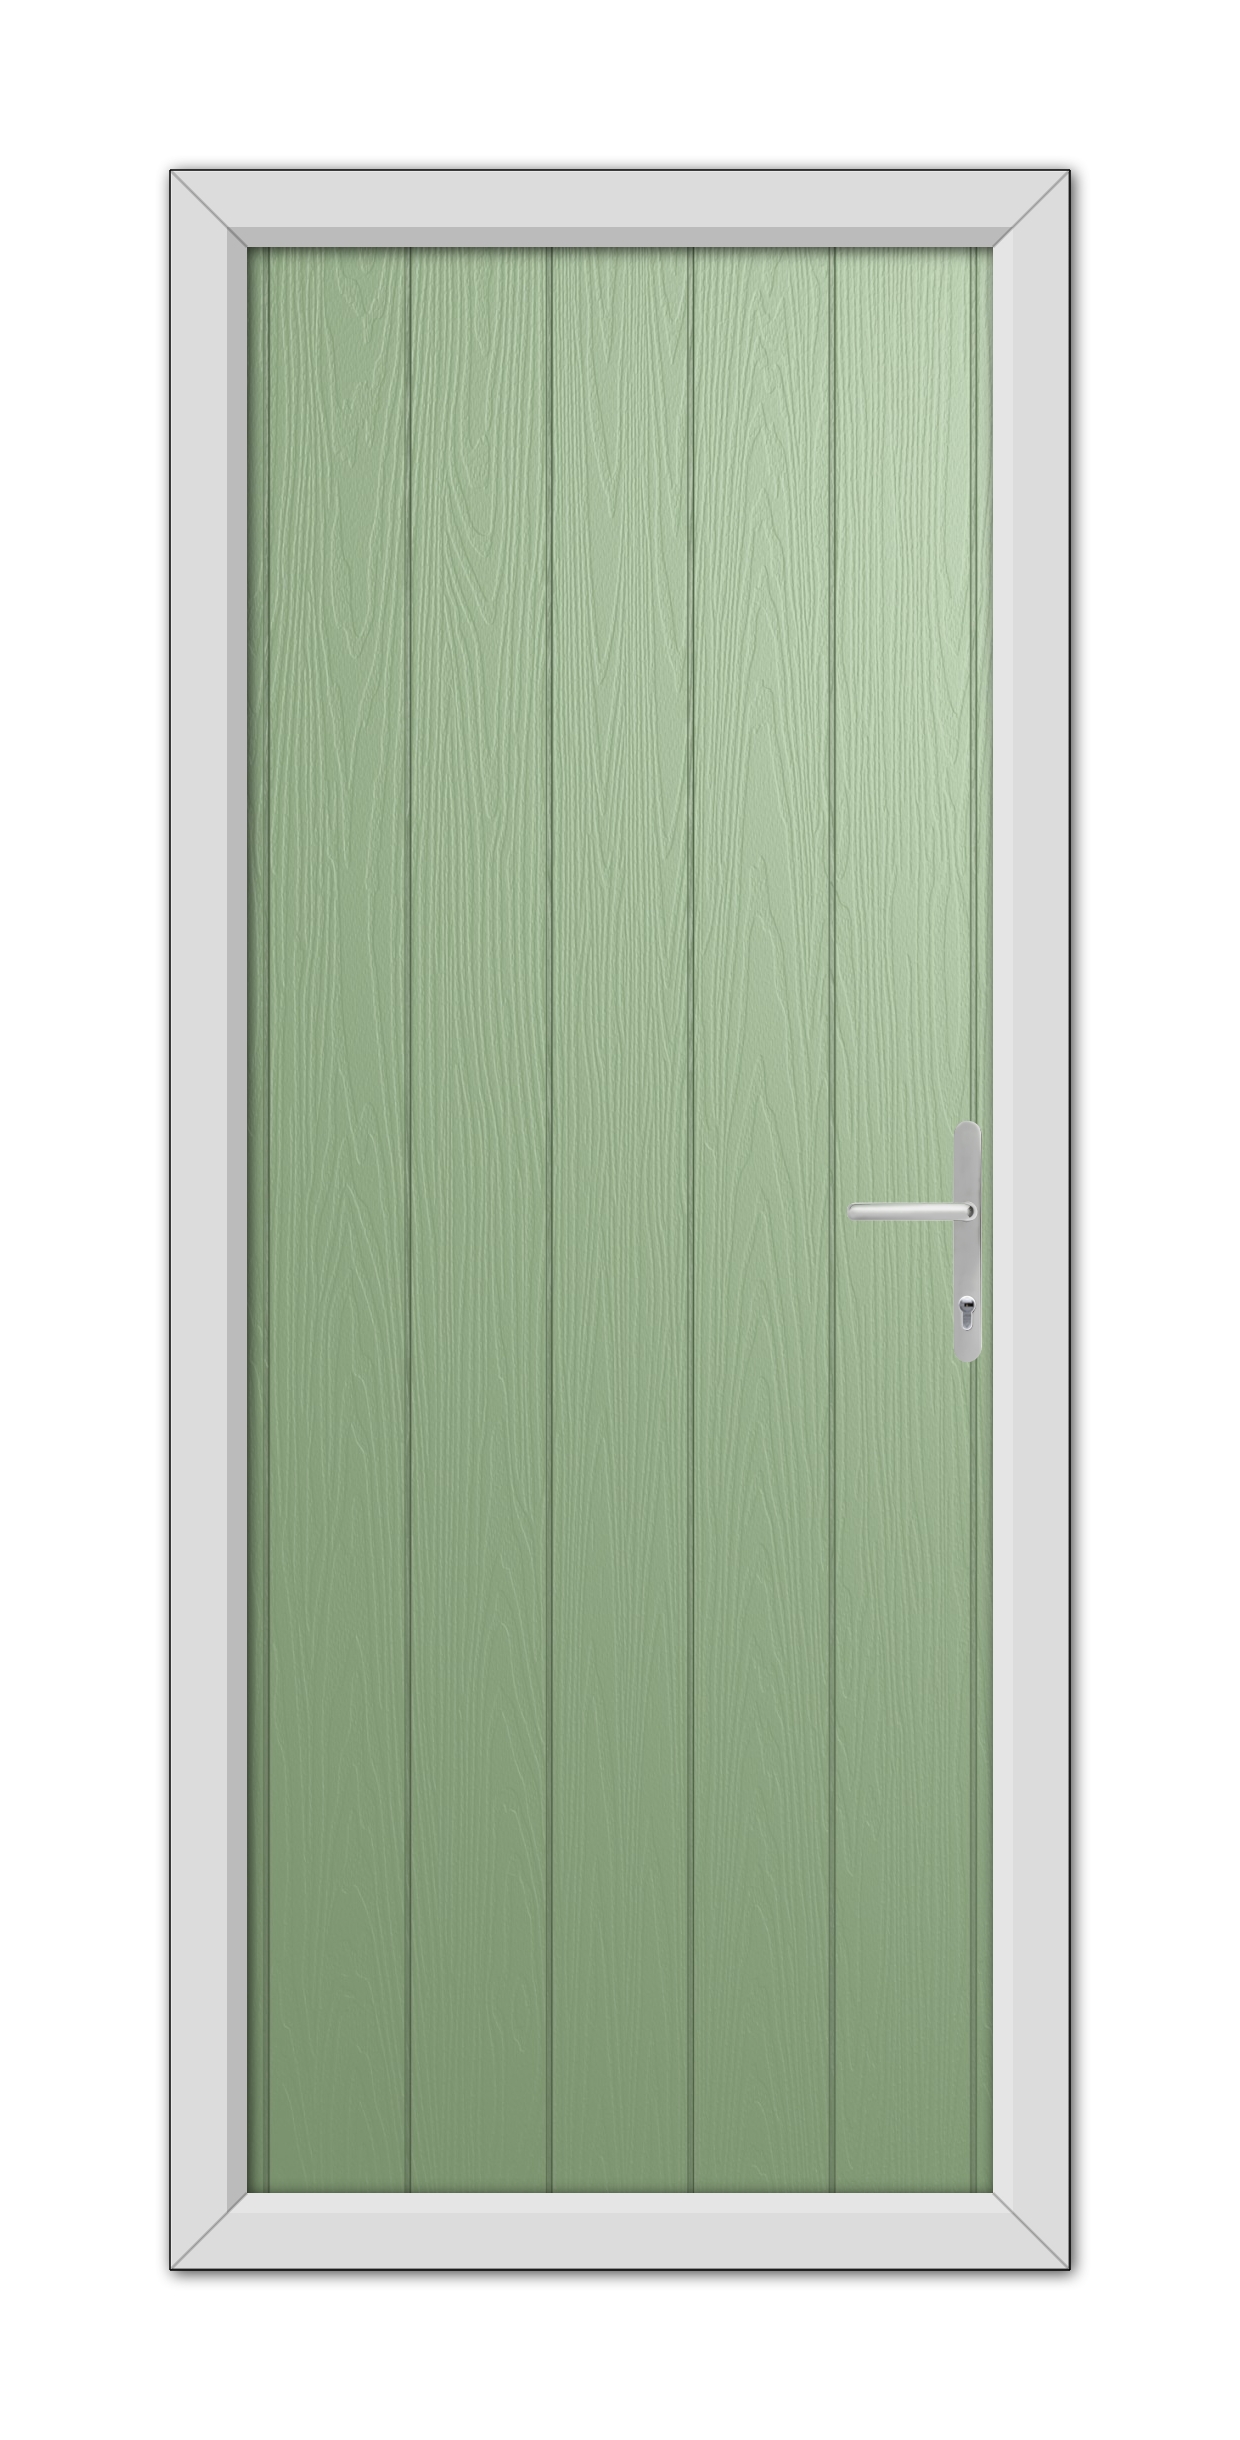 A Chartwell Green Gloucester Composite Door 48mm Timber Core with vertical panels and a modern silver handle, framed by a white door frame.